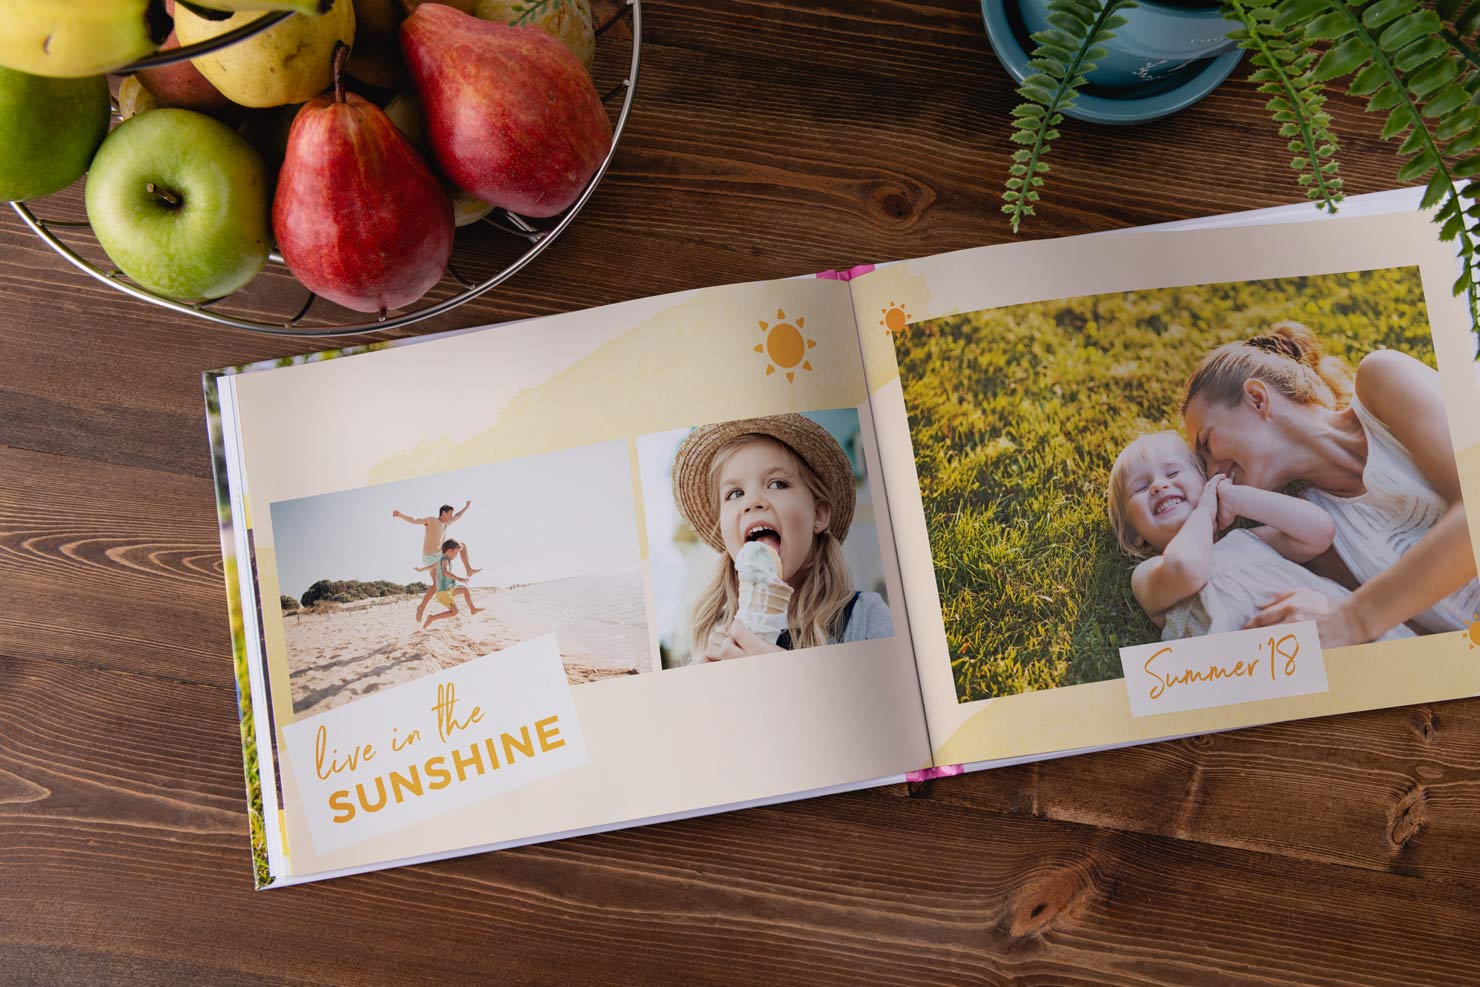 photo album of summer activities, layflat photo book design with high quality photo book images